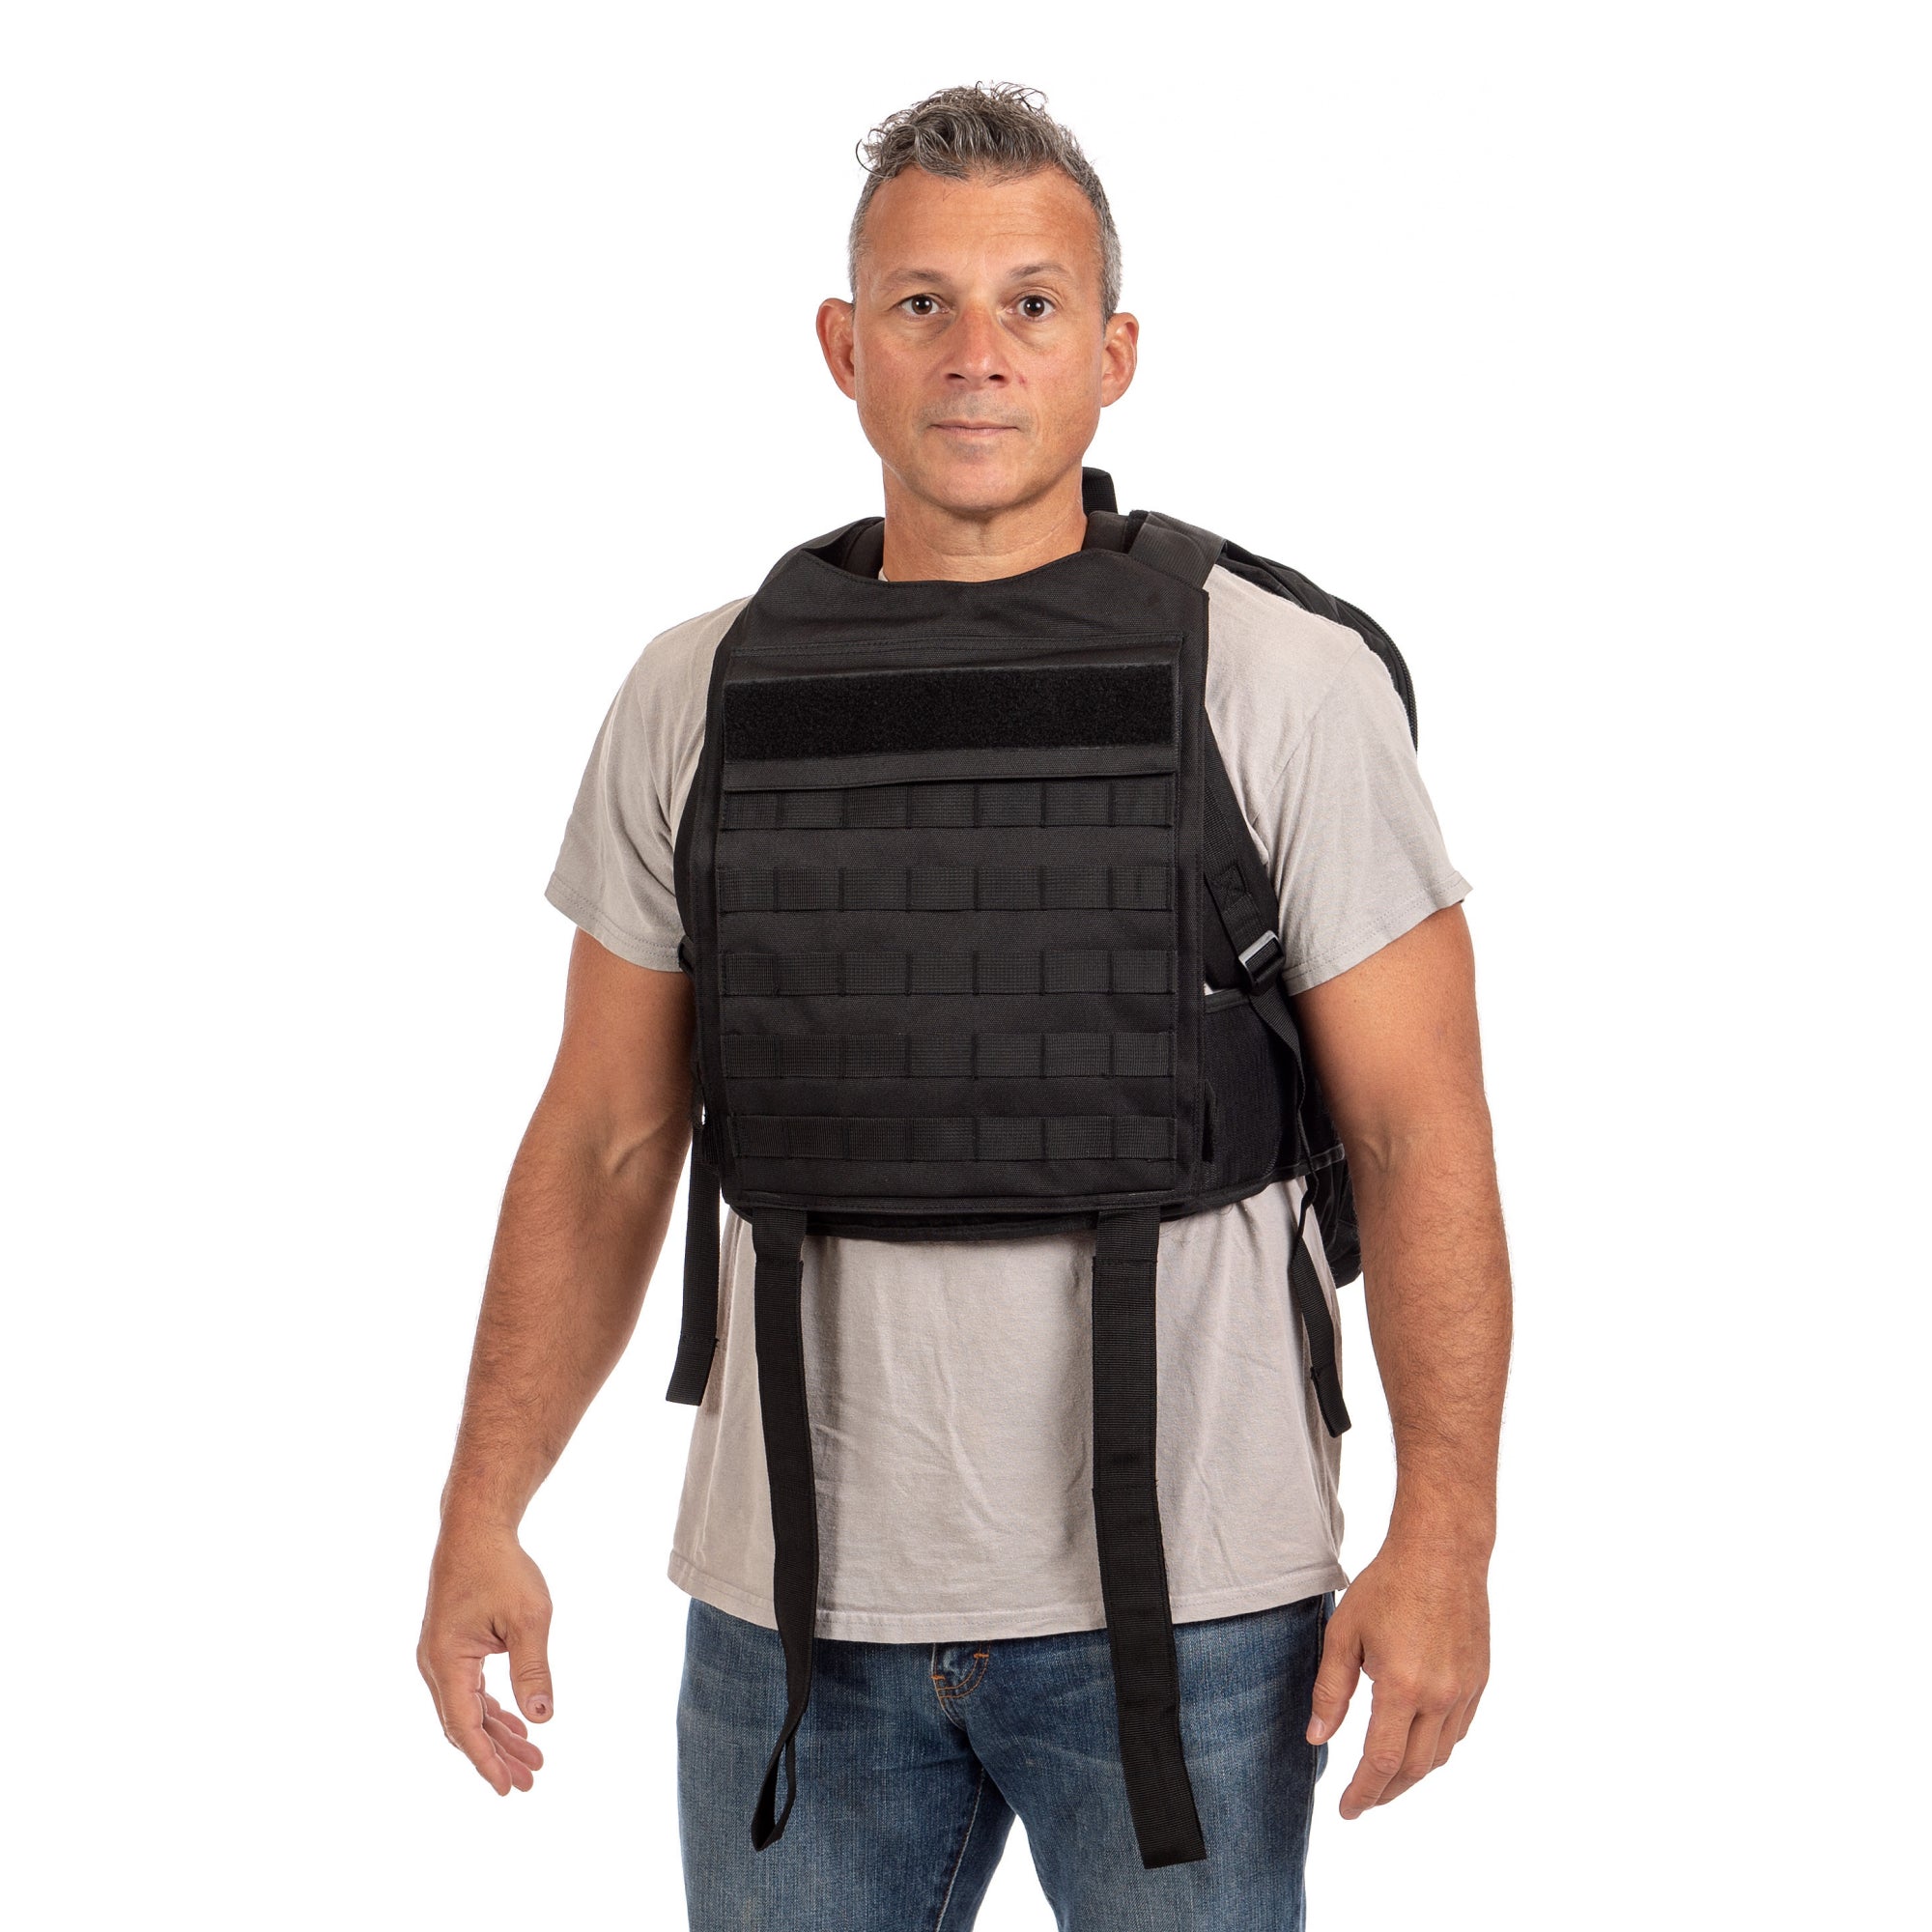 Bodyguard Armored Backpacks and Jackets